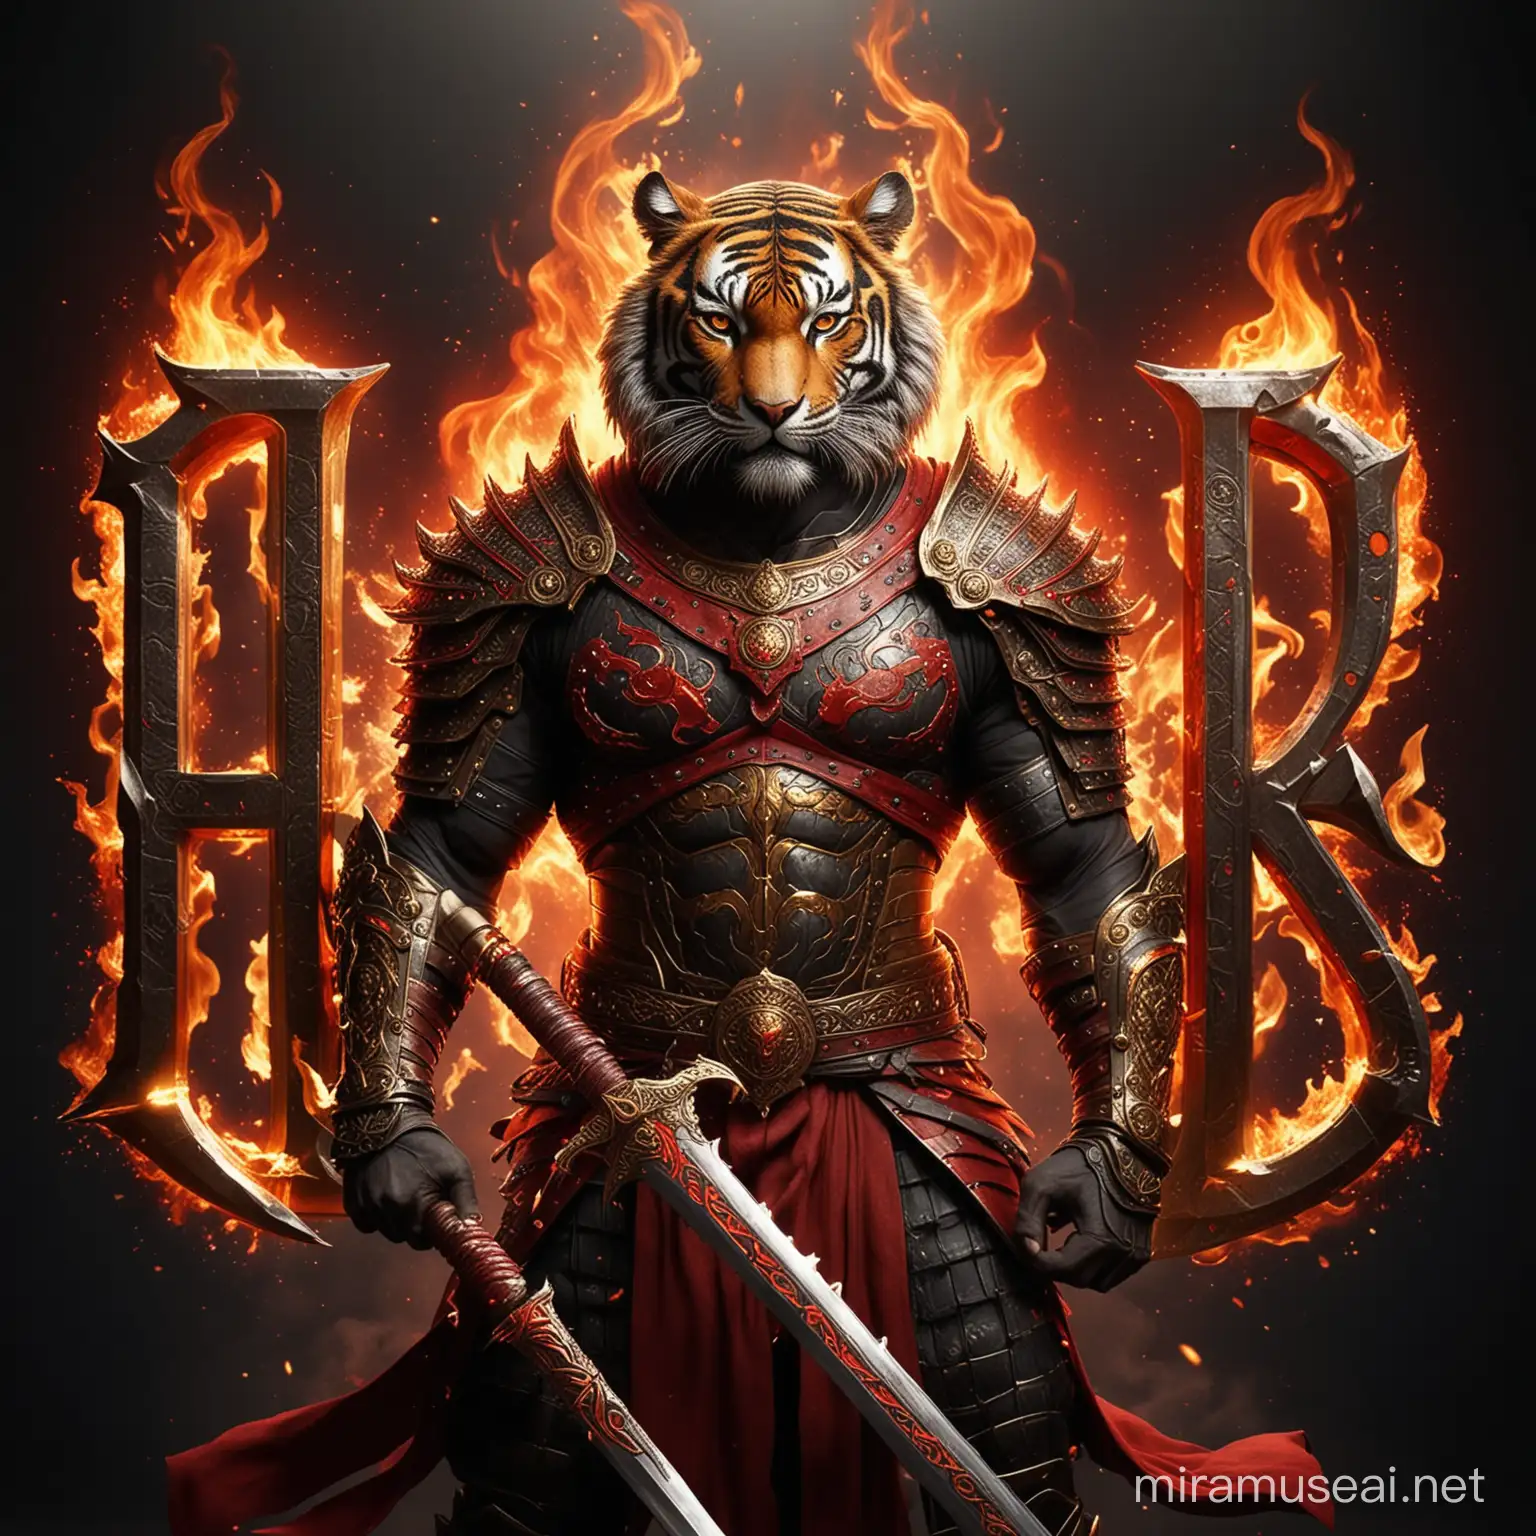 Majestic Tiger Warrior Flaming Sword and Intricate Logo in Rich Red